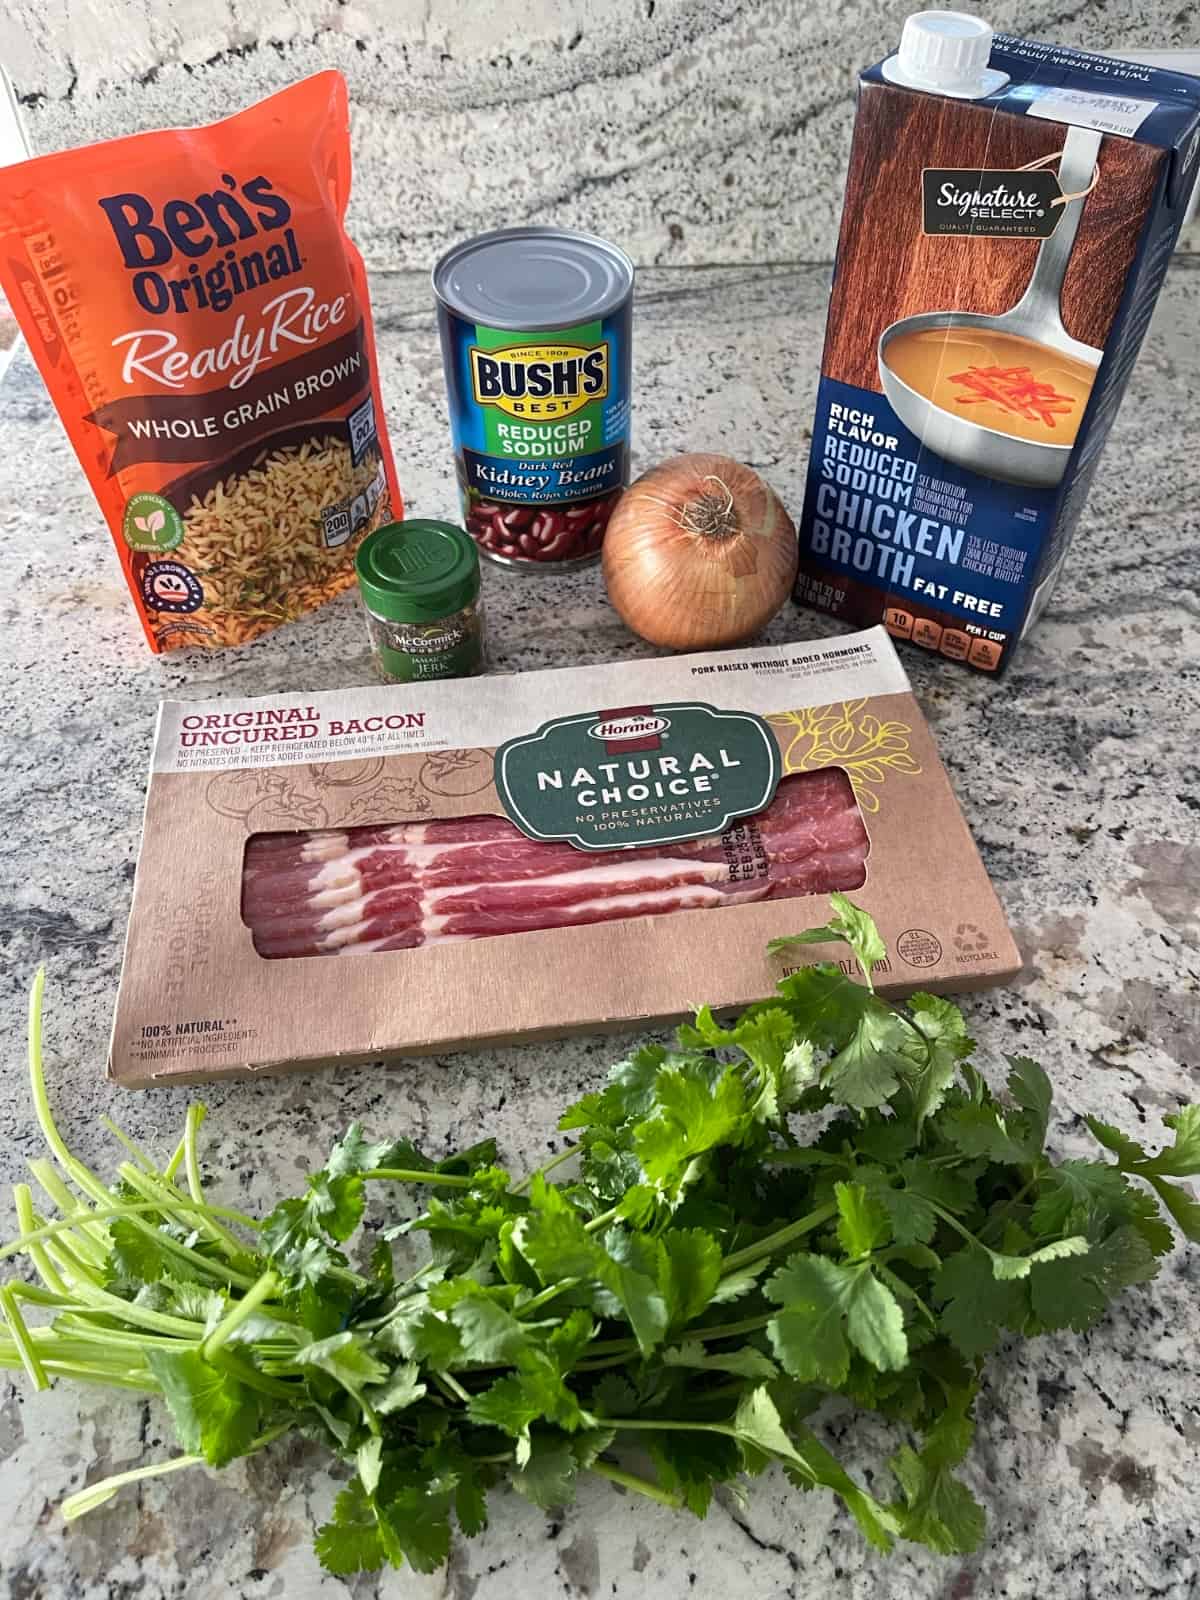 Ingredients including Uncle Ben's Whole Grain Brown Rice, Canned Red Beans, Onion, Chicken Broth, Jamaican Jock Seasoning, Bacon and Cilantro.